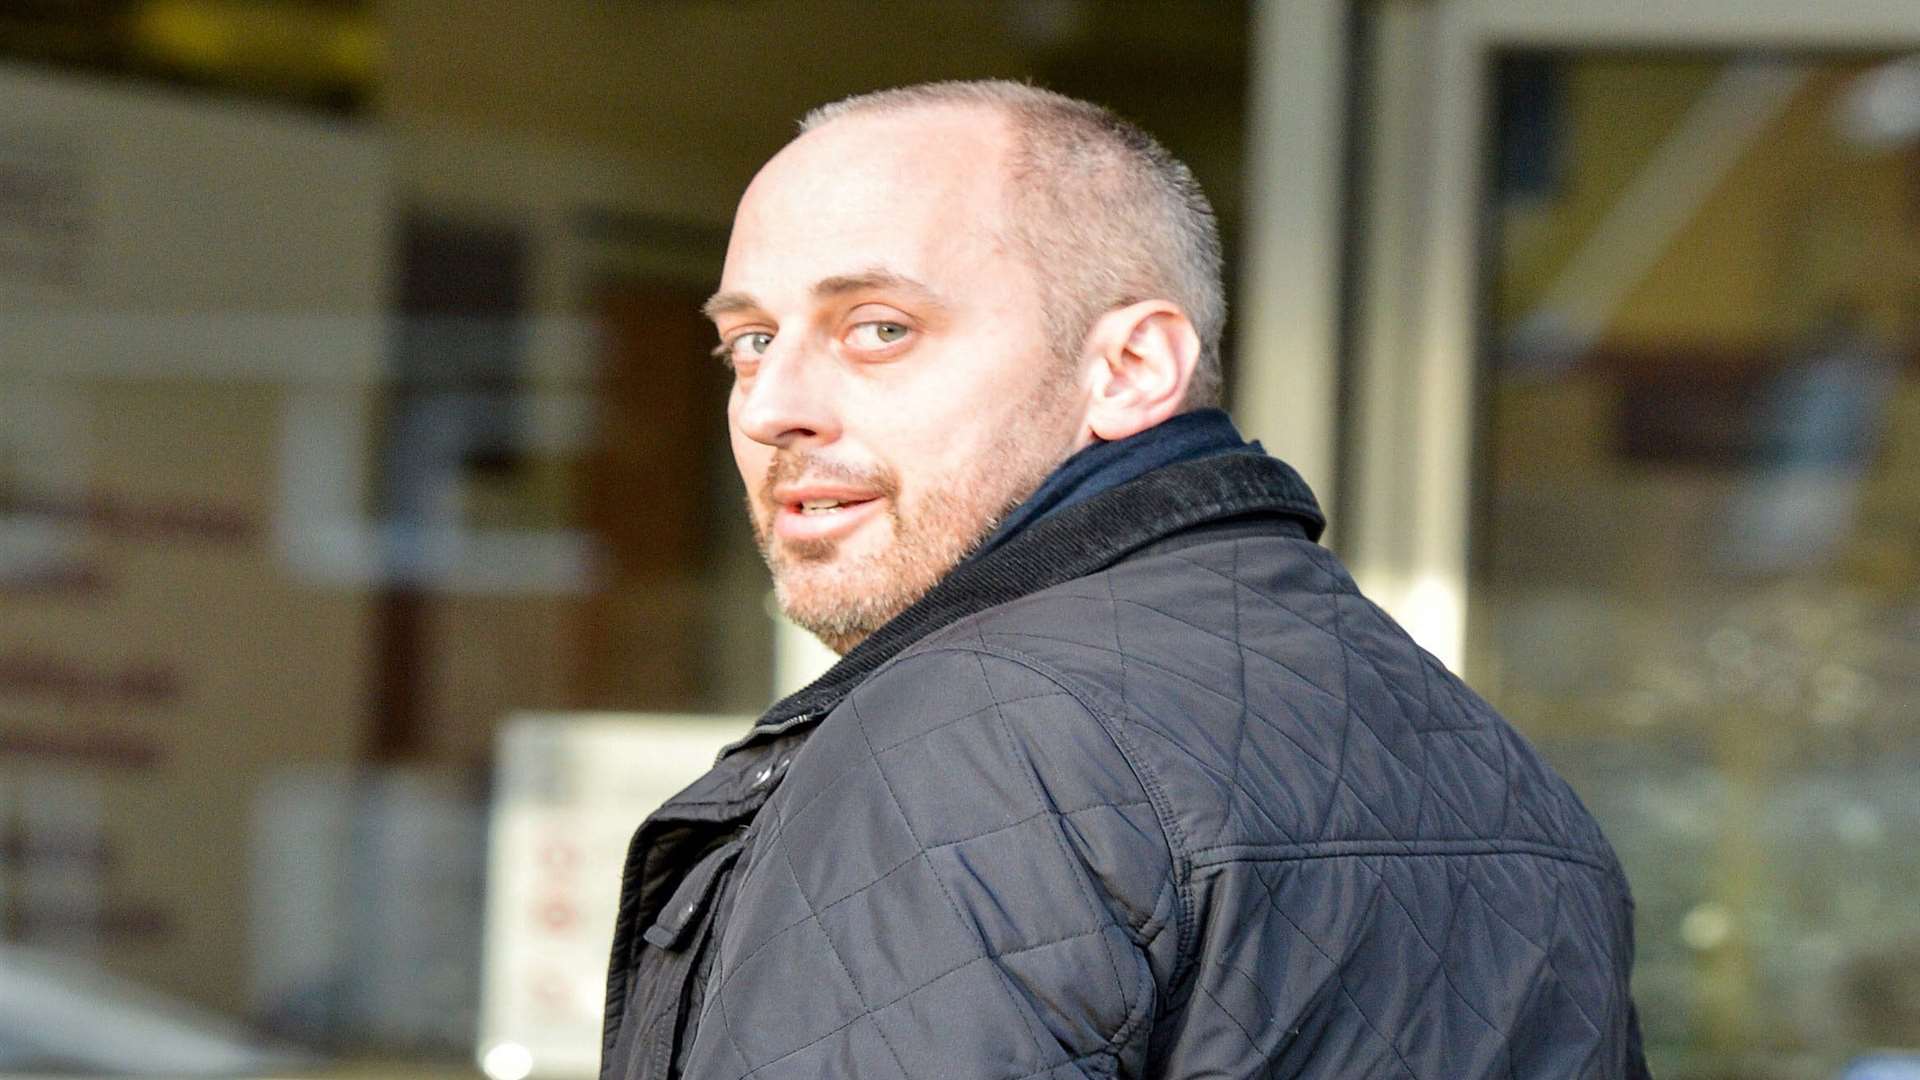 Jonathan Brewster who is appearing at Sevenoaks Magistrates Court after being charged with the theft of his ex-wifes cat. Picture: SWNS.com